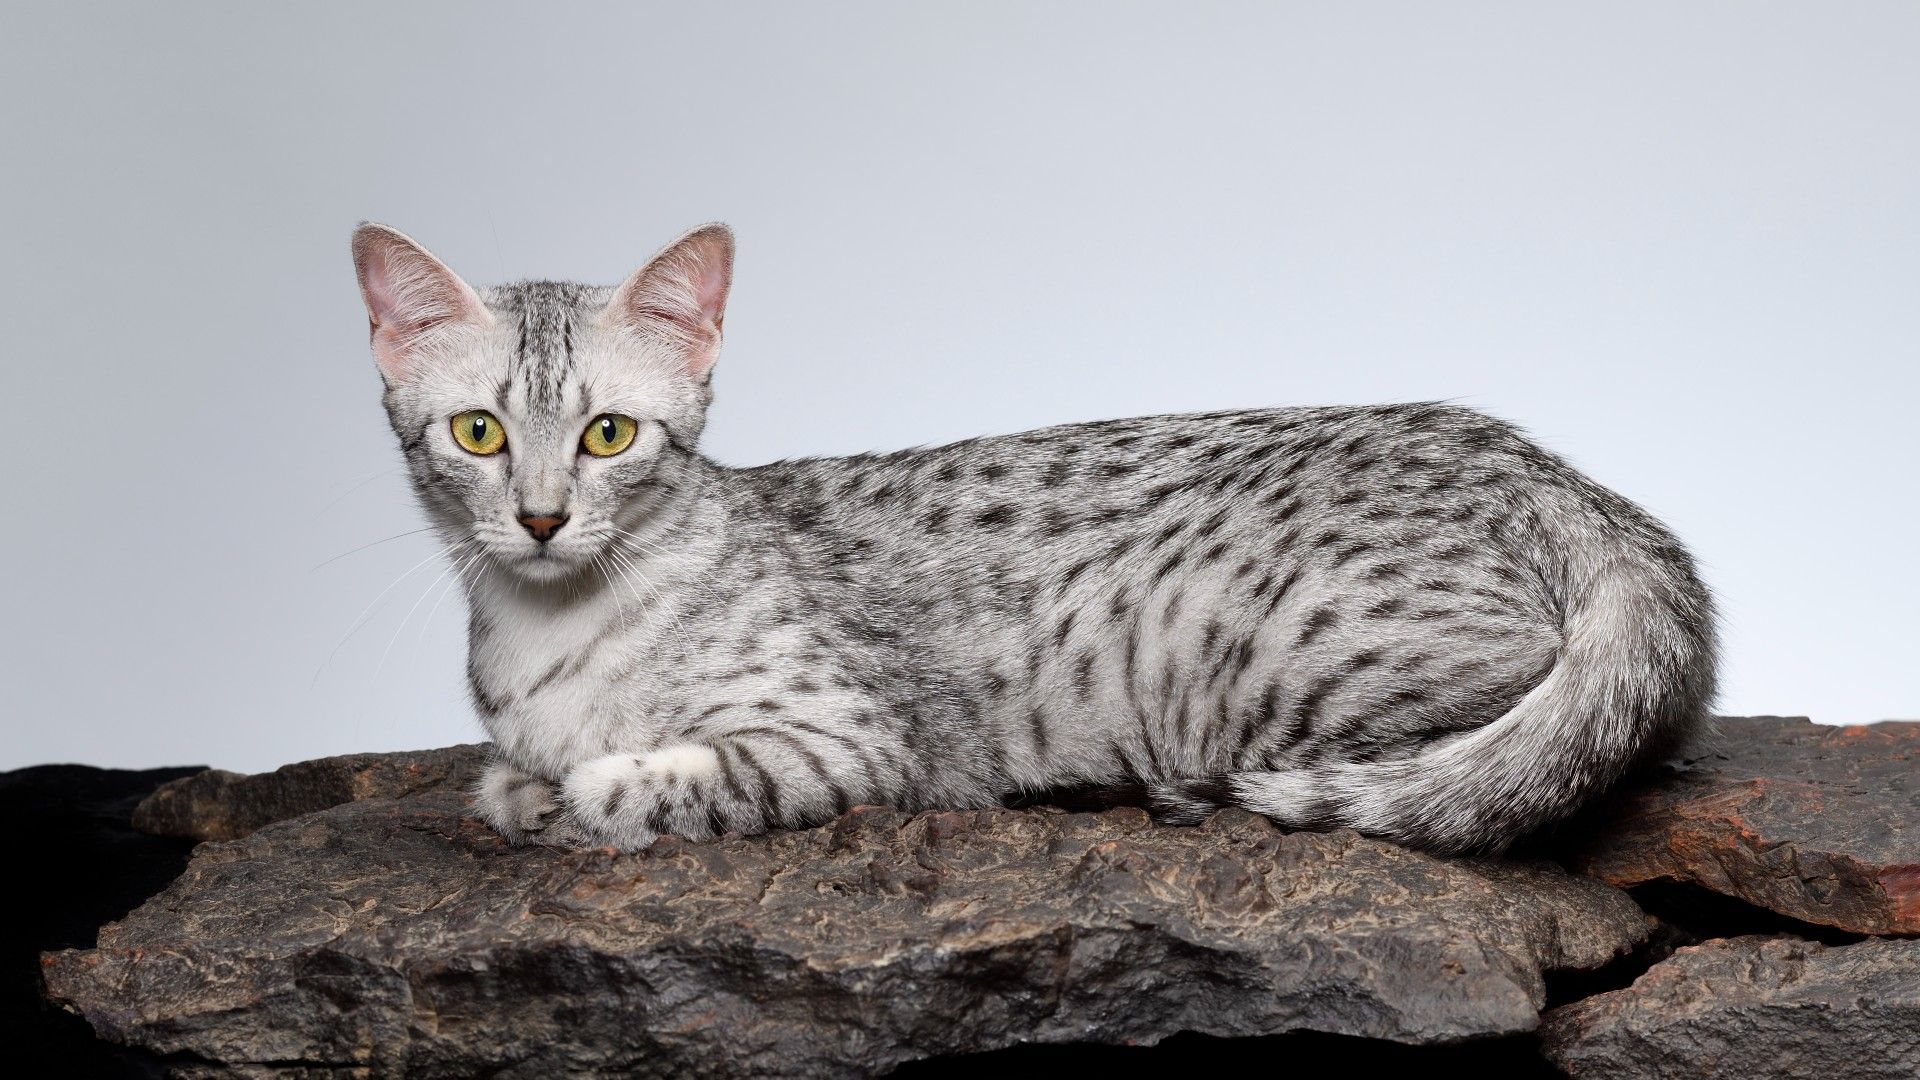 <p>                     Regarded as one of the oldest domesticated cat breeds, archaeologists have discovered cats in the tombs of ancient Egyptians that look a lot like the Egyptian Mau that we know today. Sporting natural spots on their coat and skin, this breed has a lithe and athletic body and a minimally shedding coat.                   </p>                                      <p>                     Fiercely devoted to their humans, the Egyptian Mau loves playing with water and is so smart that they’ll quickly learn how to turn on the faucet to gain access. Active, agile, and energetic, this is a social breed that needs to be kept busy. However, as long as they get plenty of stimulation throughout the day, they’ll take great delight in a good snuggle session once they’ve worn themselves out.                   </p>                                      <p>                     Naturally good with children (and other animals if exposed to them from a young age), the Egyptian Mau lives well with almost all four-legged and four-pawed family members. While not as chatty as Siamese cats, they can still be talkative, deploying a range of sounds like chirps, chortles, and whistles to interact with their people.                   </p>